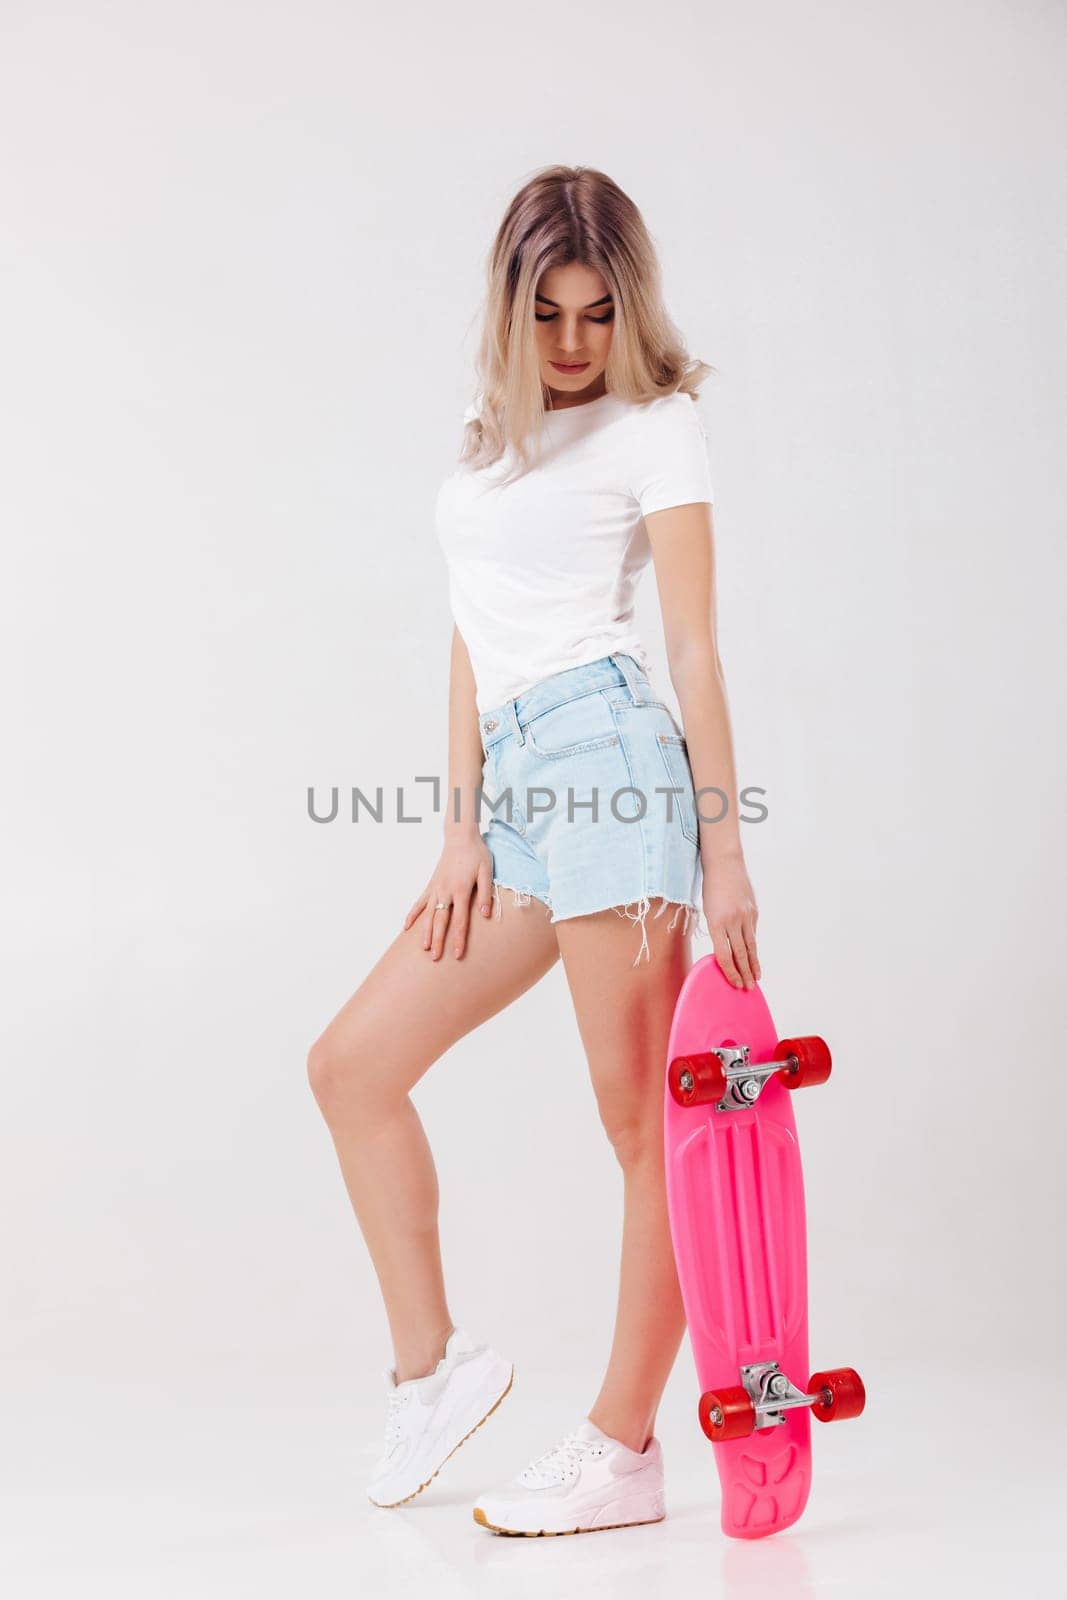 beautiful woman in white t-shirt and denim shorts with pink skateboard